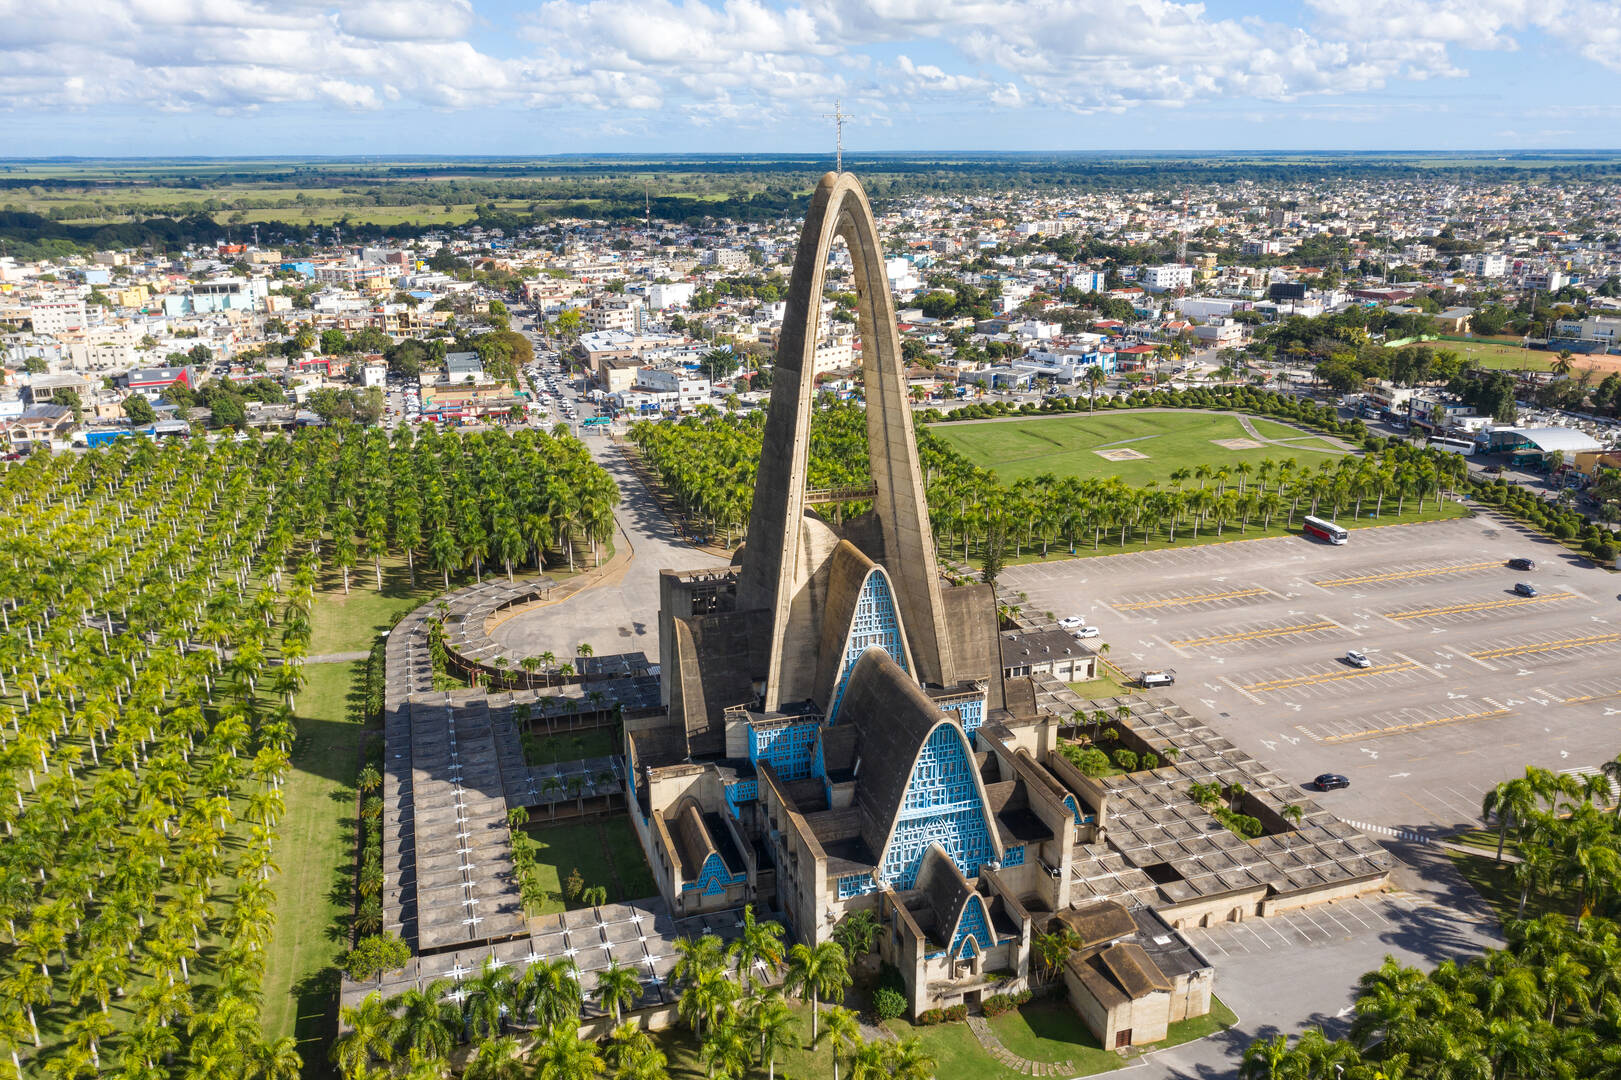 The Cathedral Basilica of Our Lady of Altagracia in Salvaleón de Higüey in the Dominican Republic. (iStock)